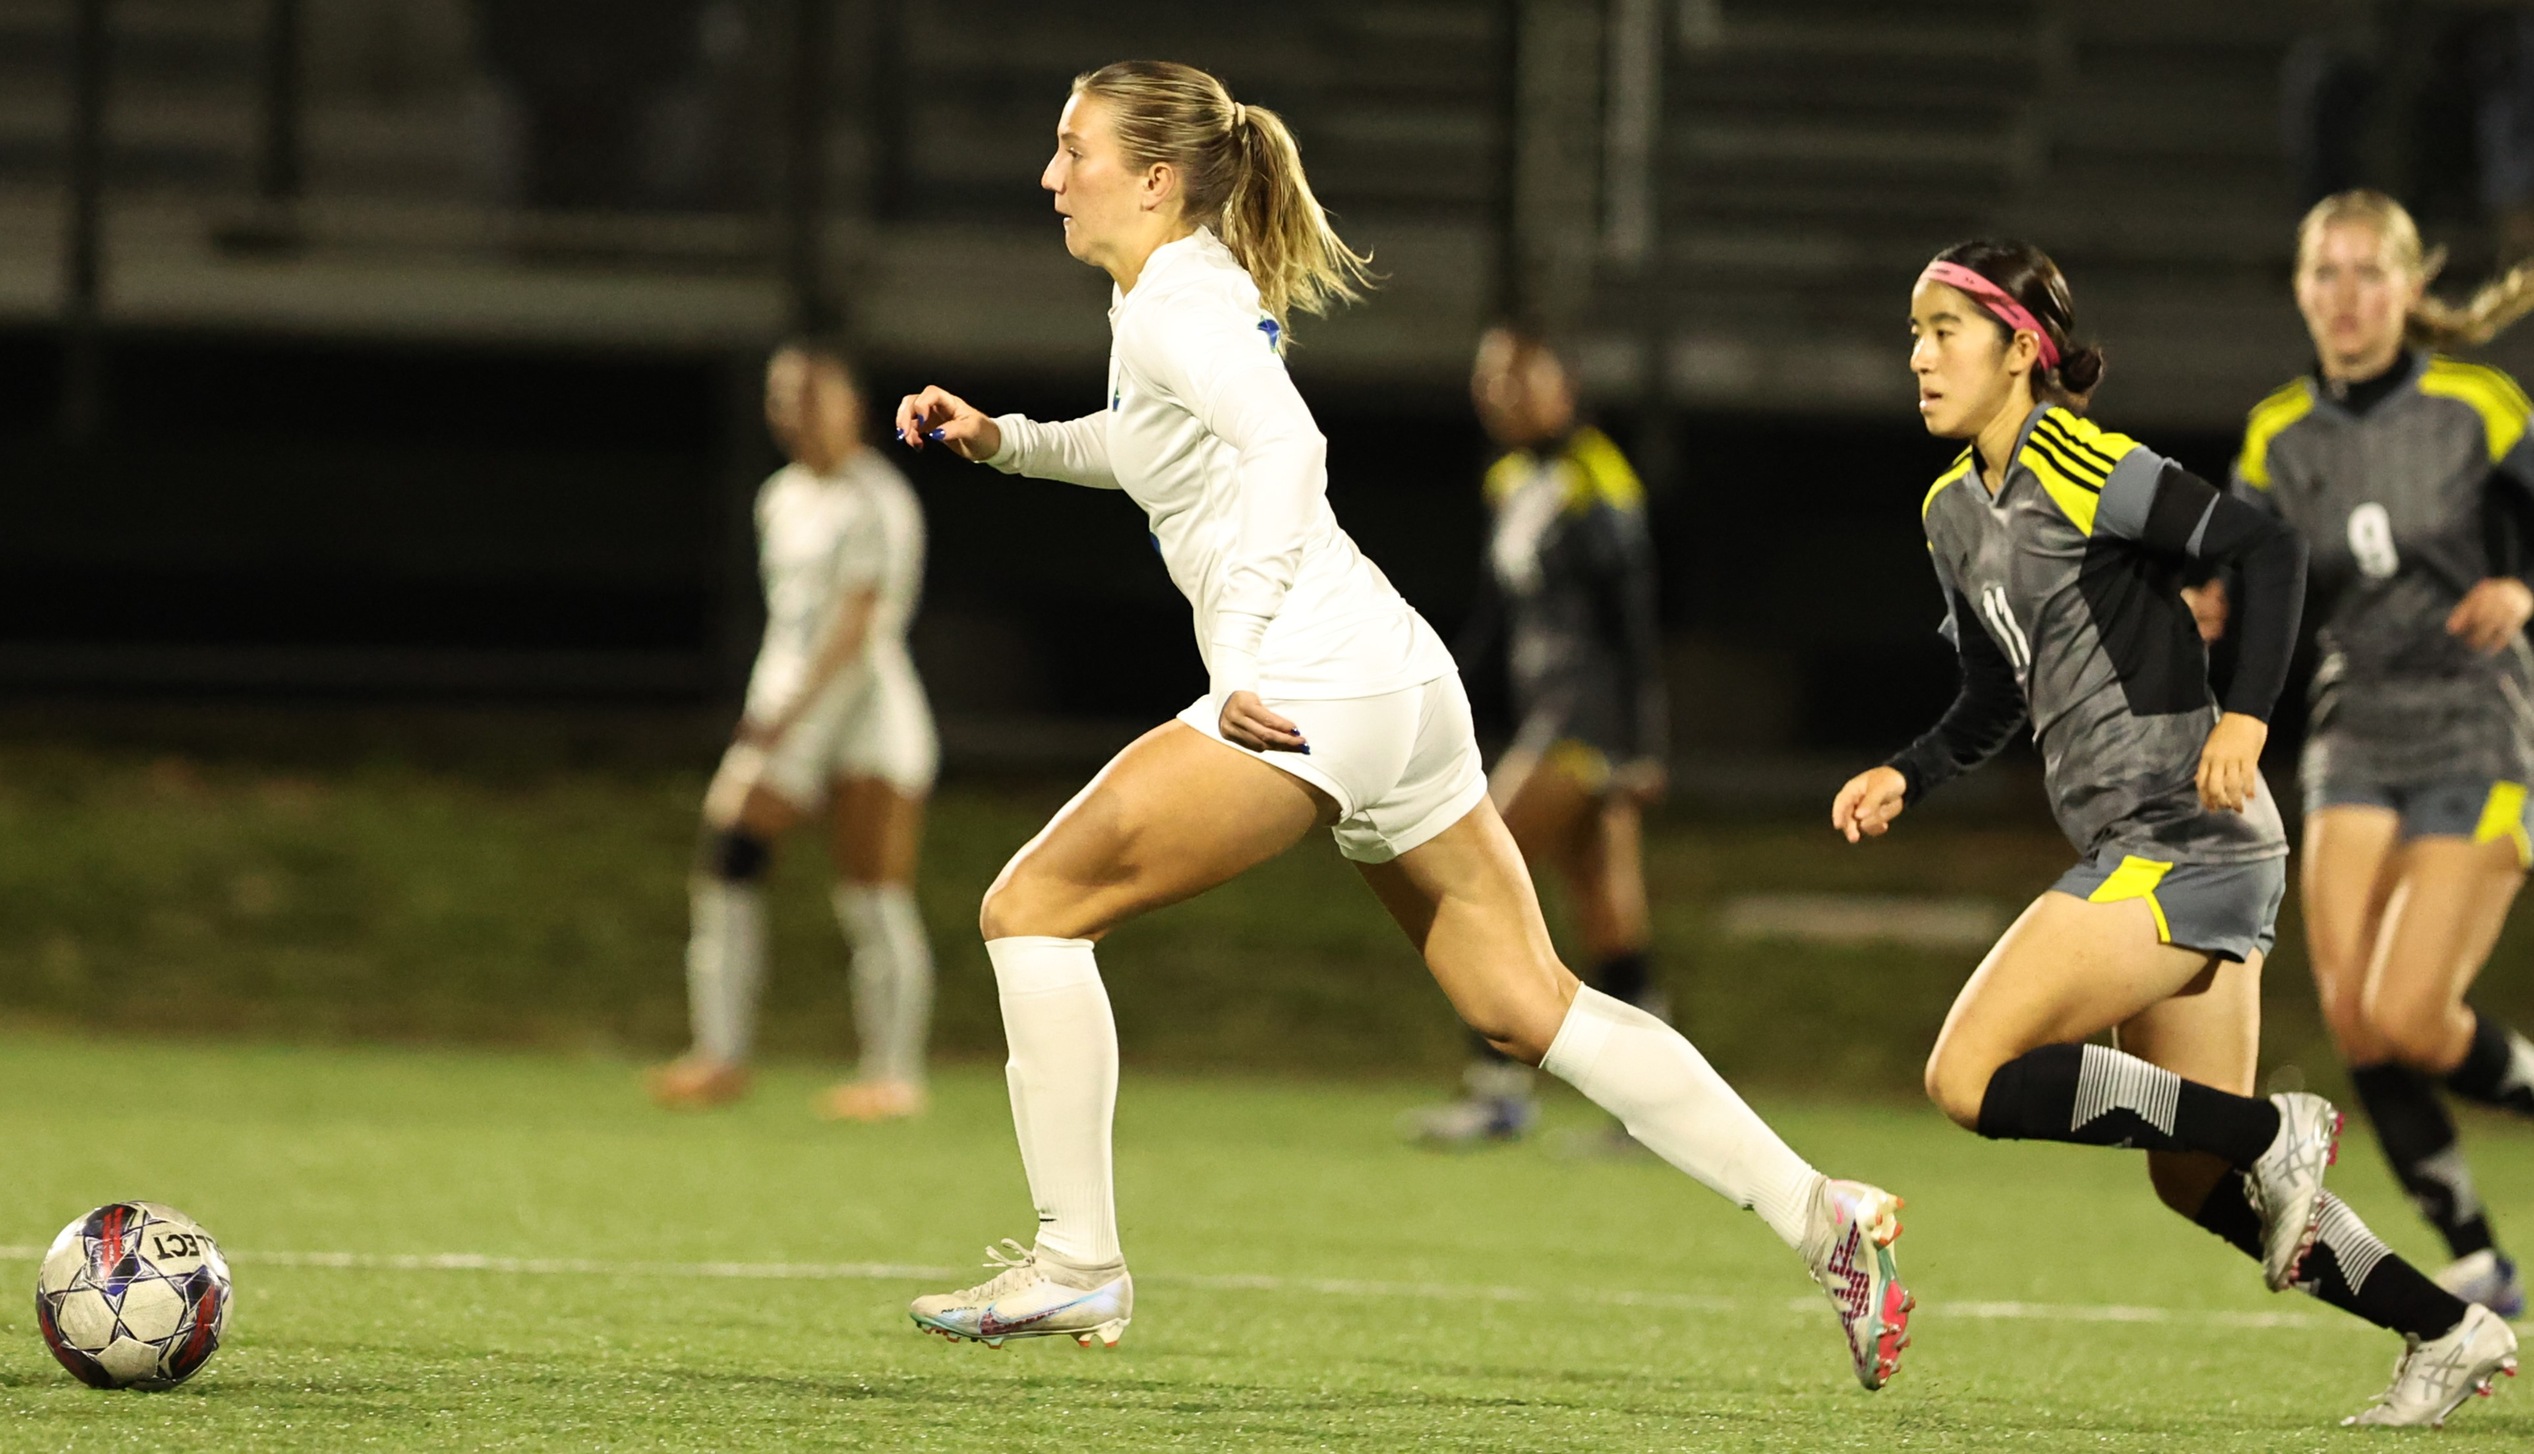 Women's soccer team holds off Tyler, advances to semifinals